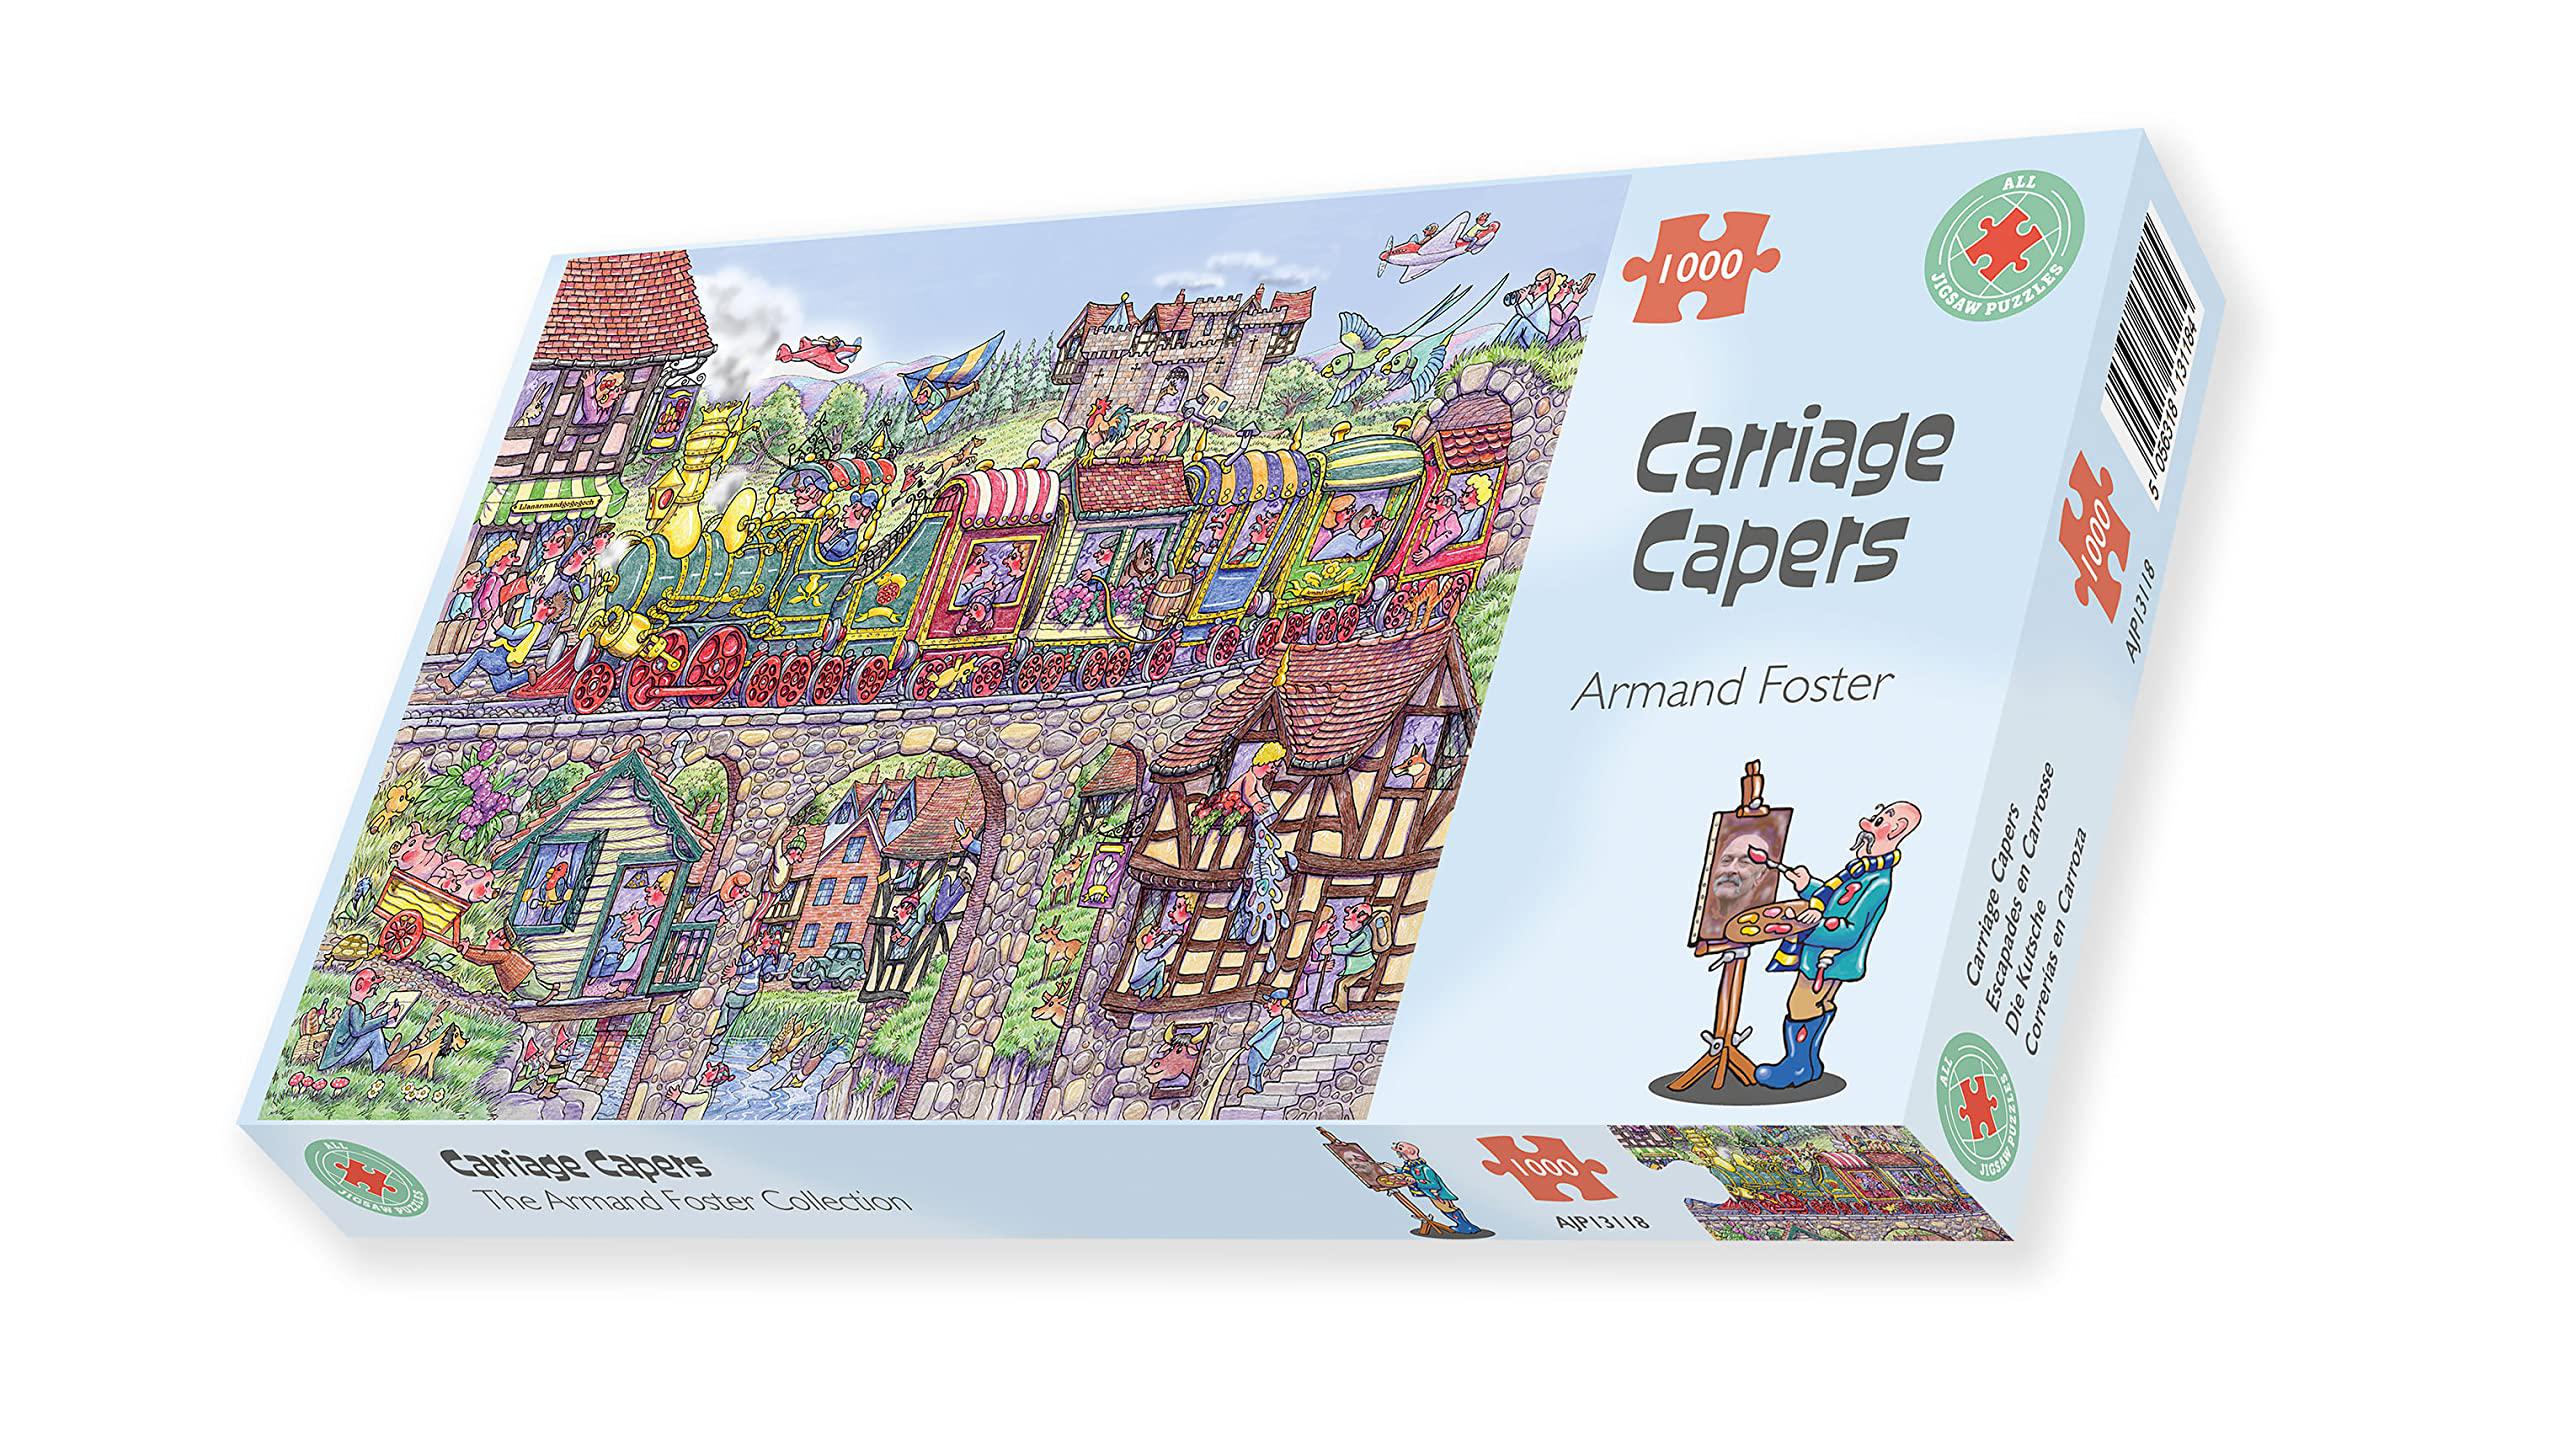 All Jigsaw Puzzles 1000 piece jigsaw puzzle for adults - carriage capers by armand foster - cartoon jigsaw puzzles 20in x 26in - sustainably sou